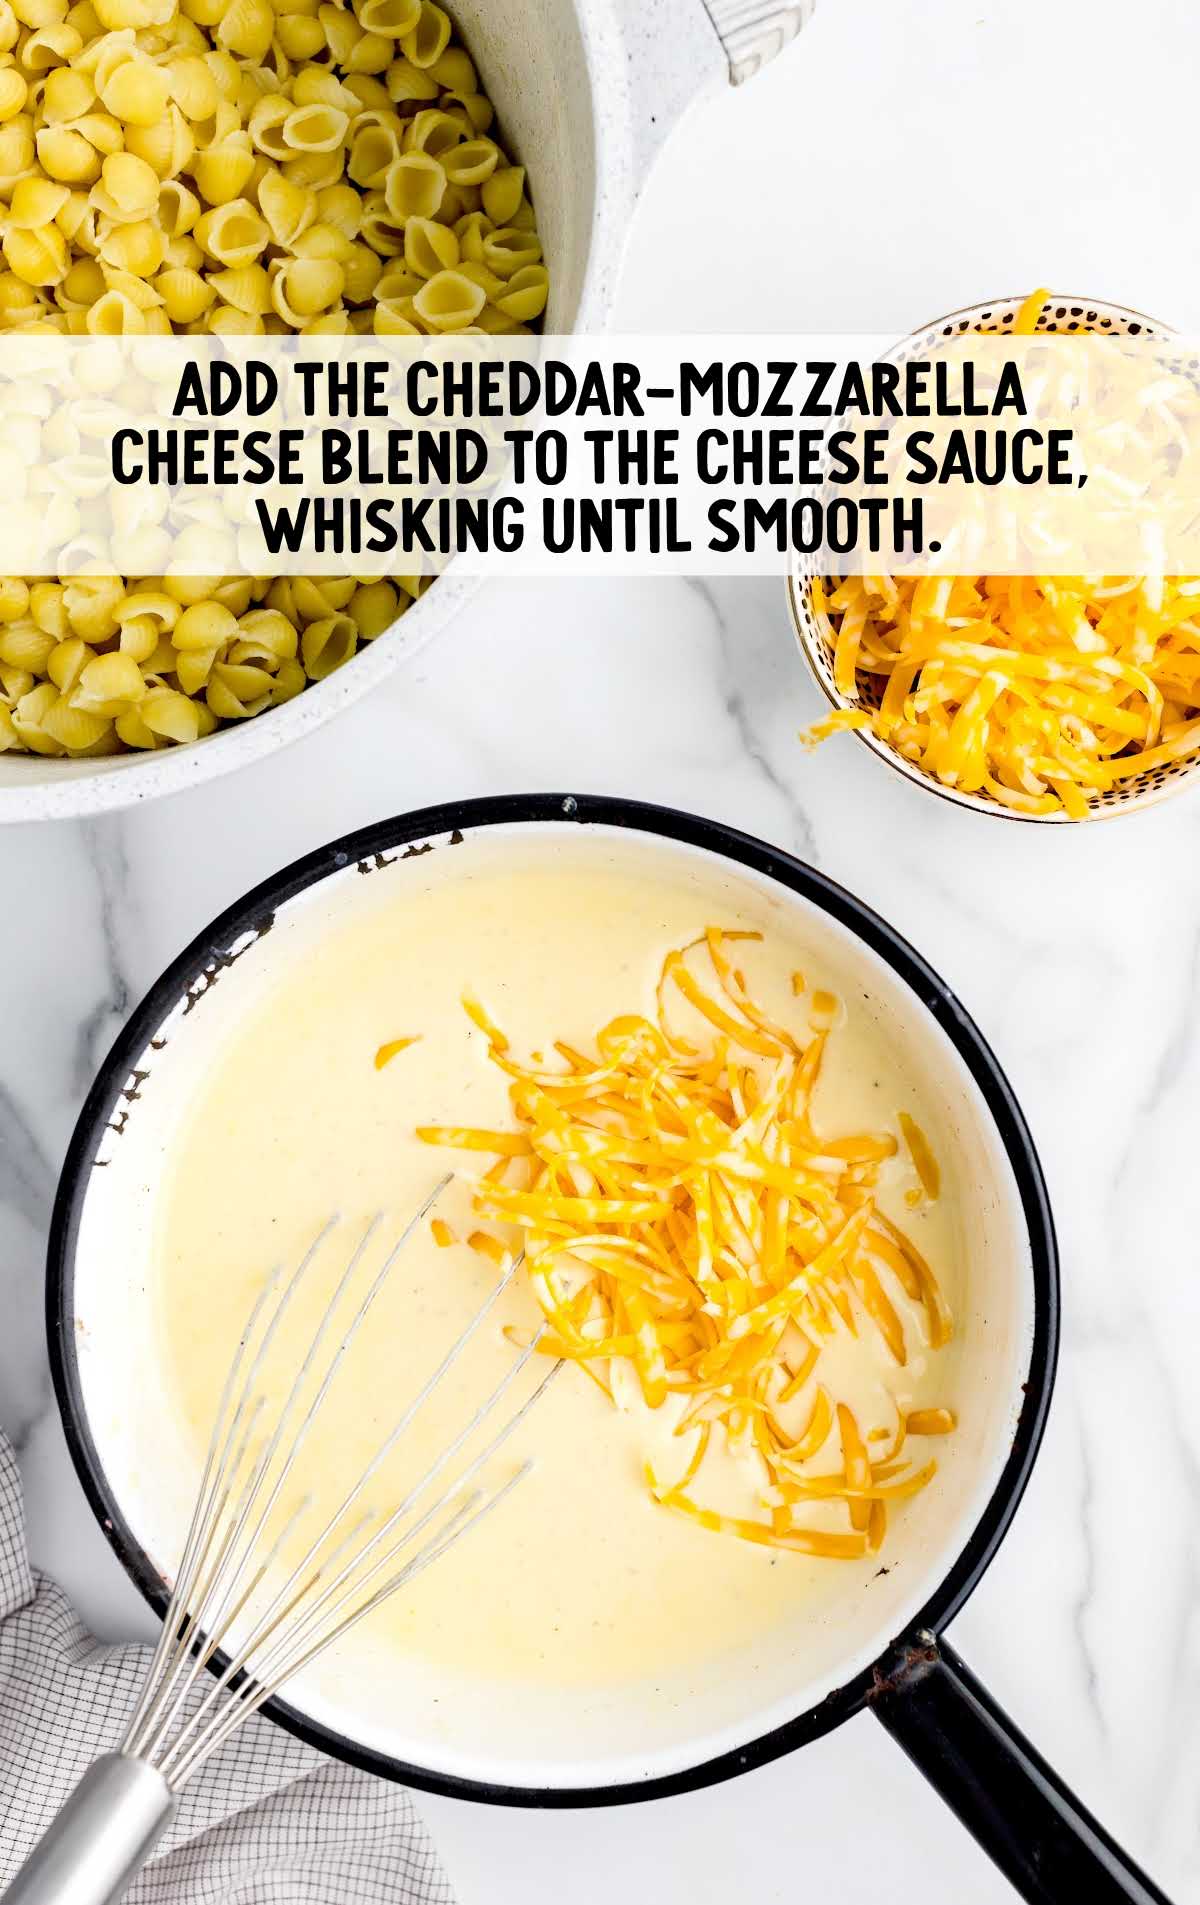 cheddar mozzarella cheese blend added to the cheese sauce and whisked together in a bowl